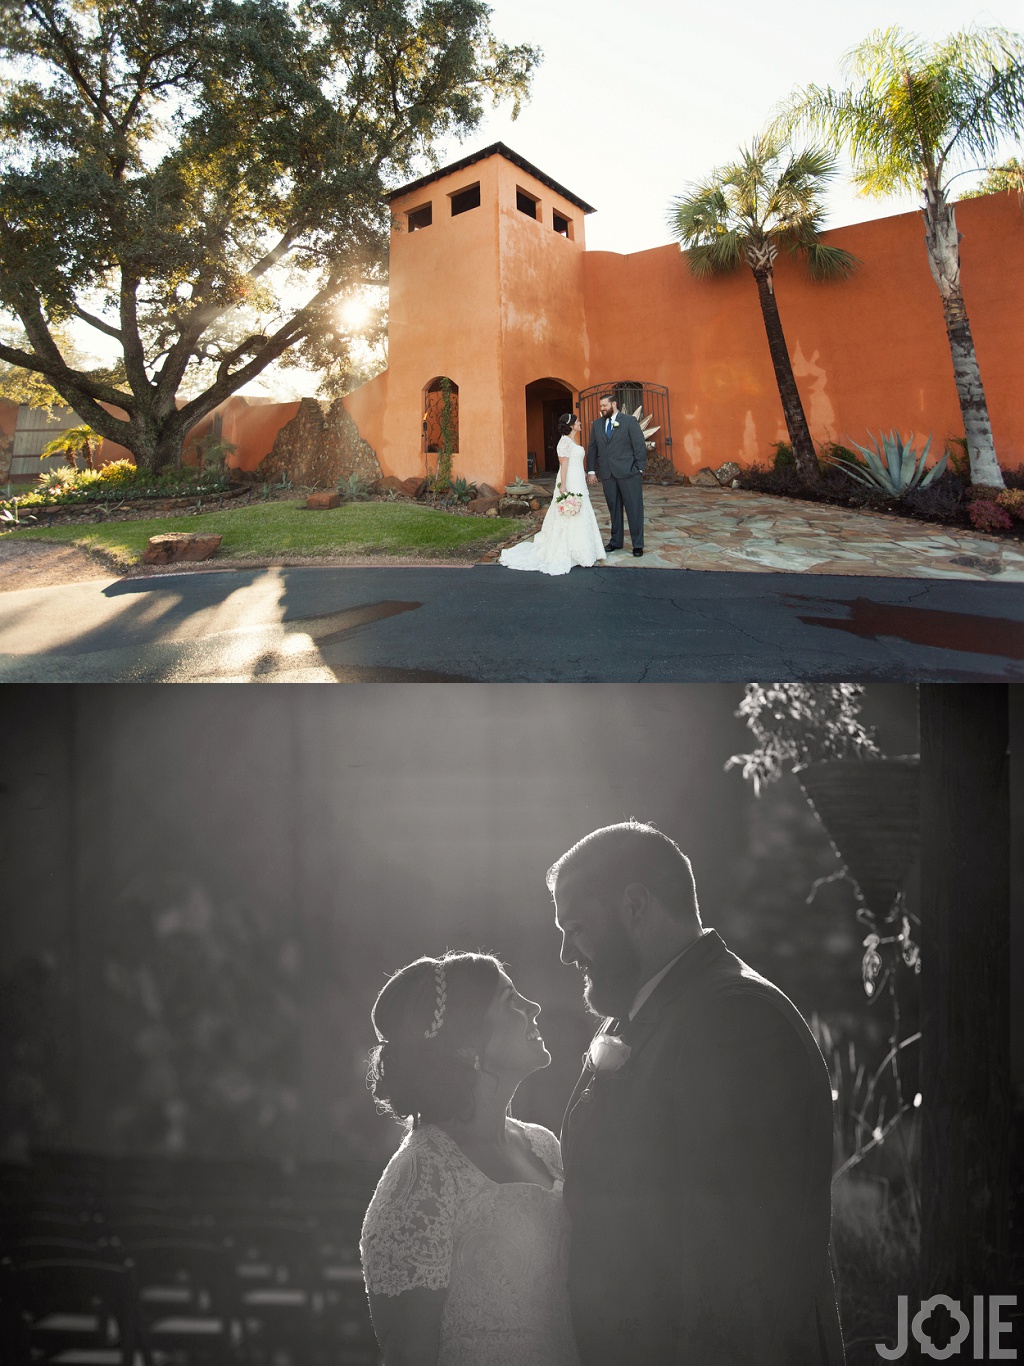 Outdoor wedding portraits at Agave Real by Joie Photographie